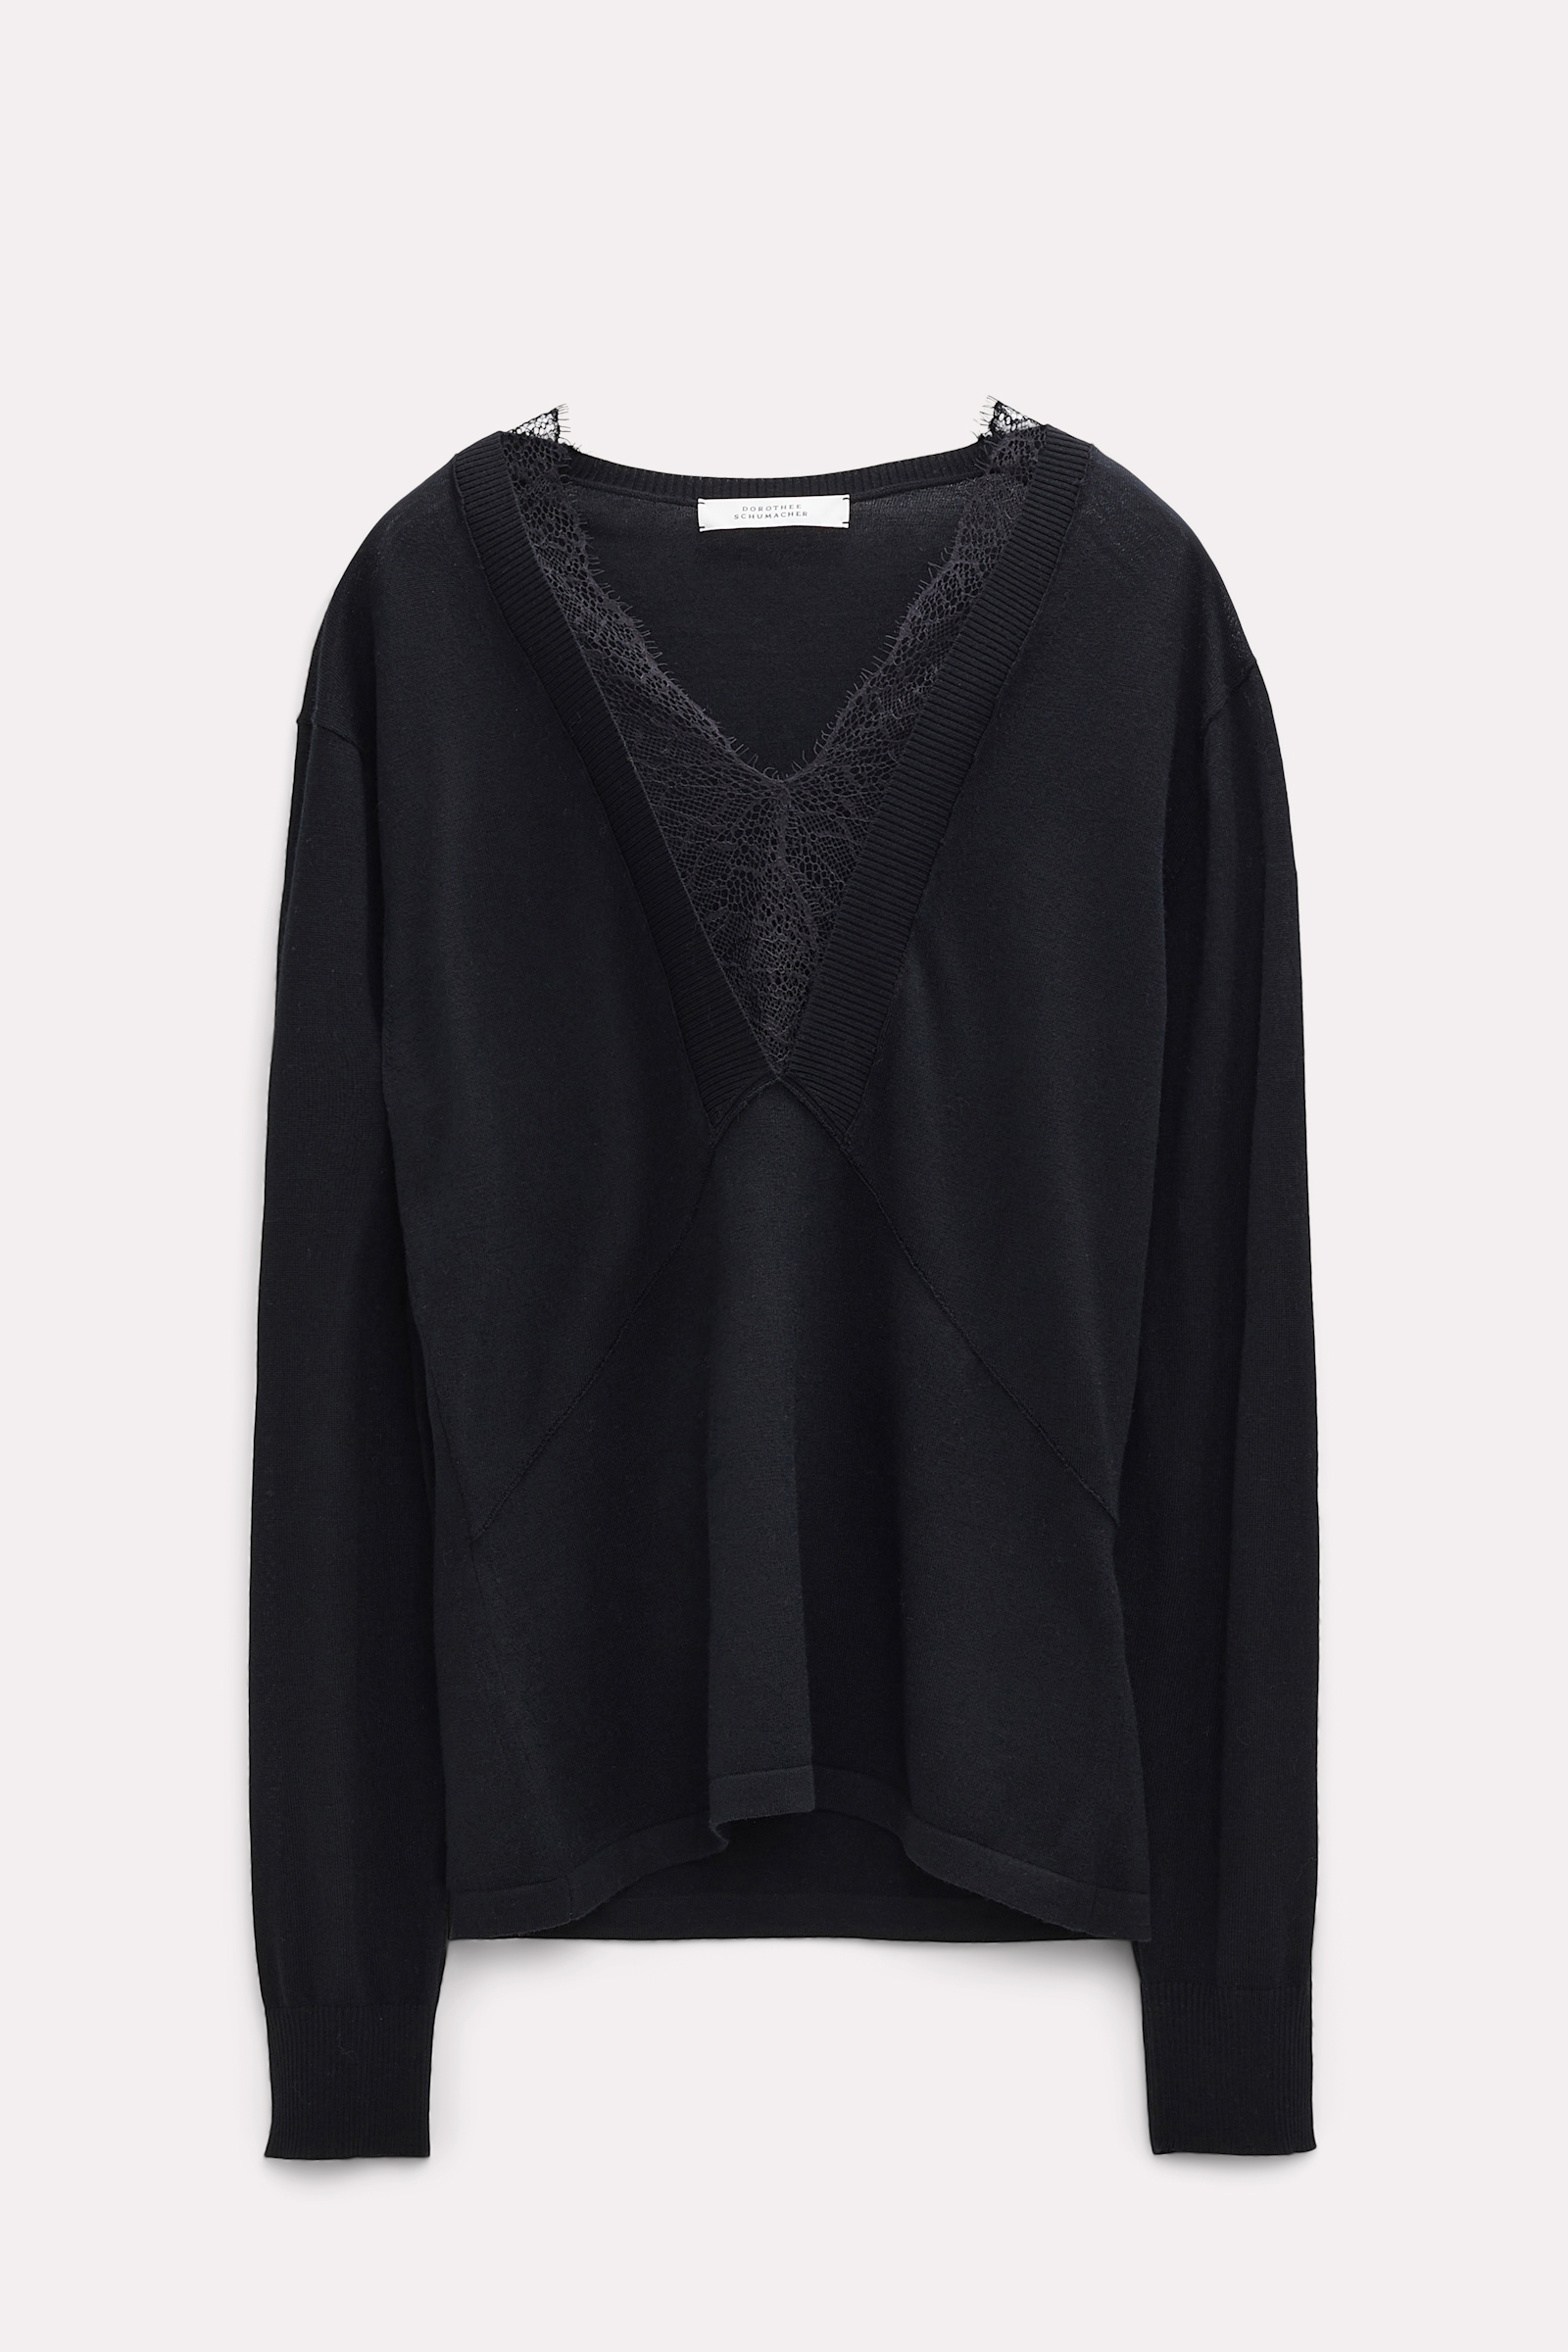 Dorothee Schumacher Sweater with lace details pure black